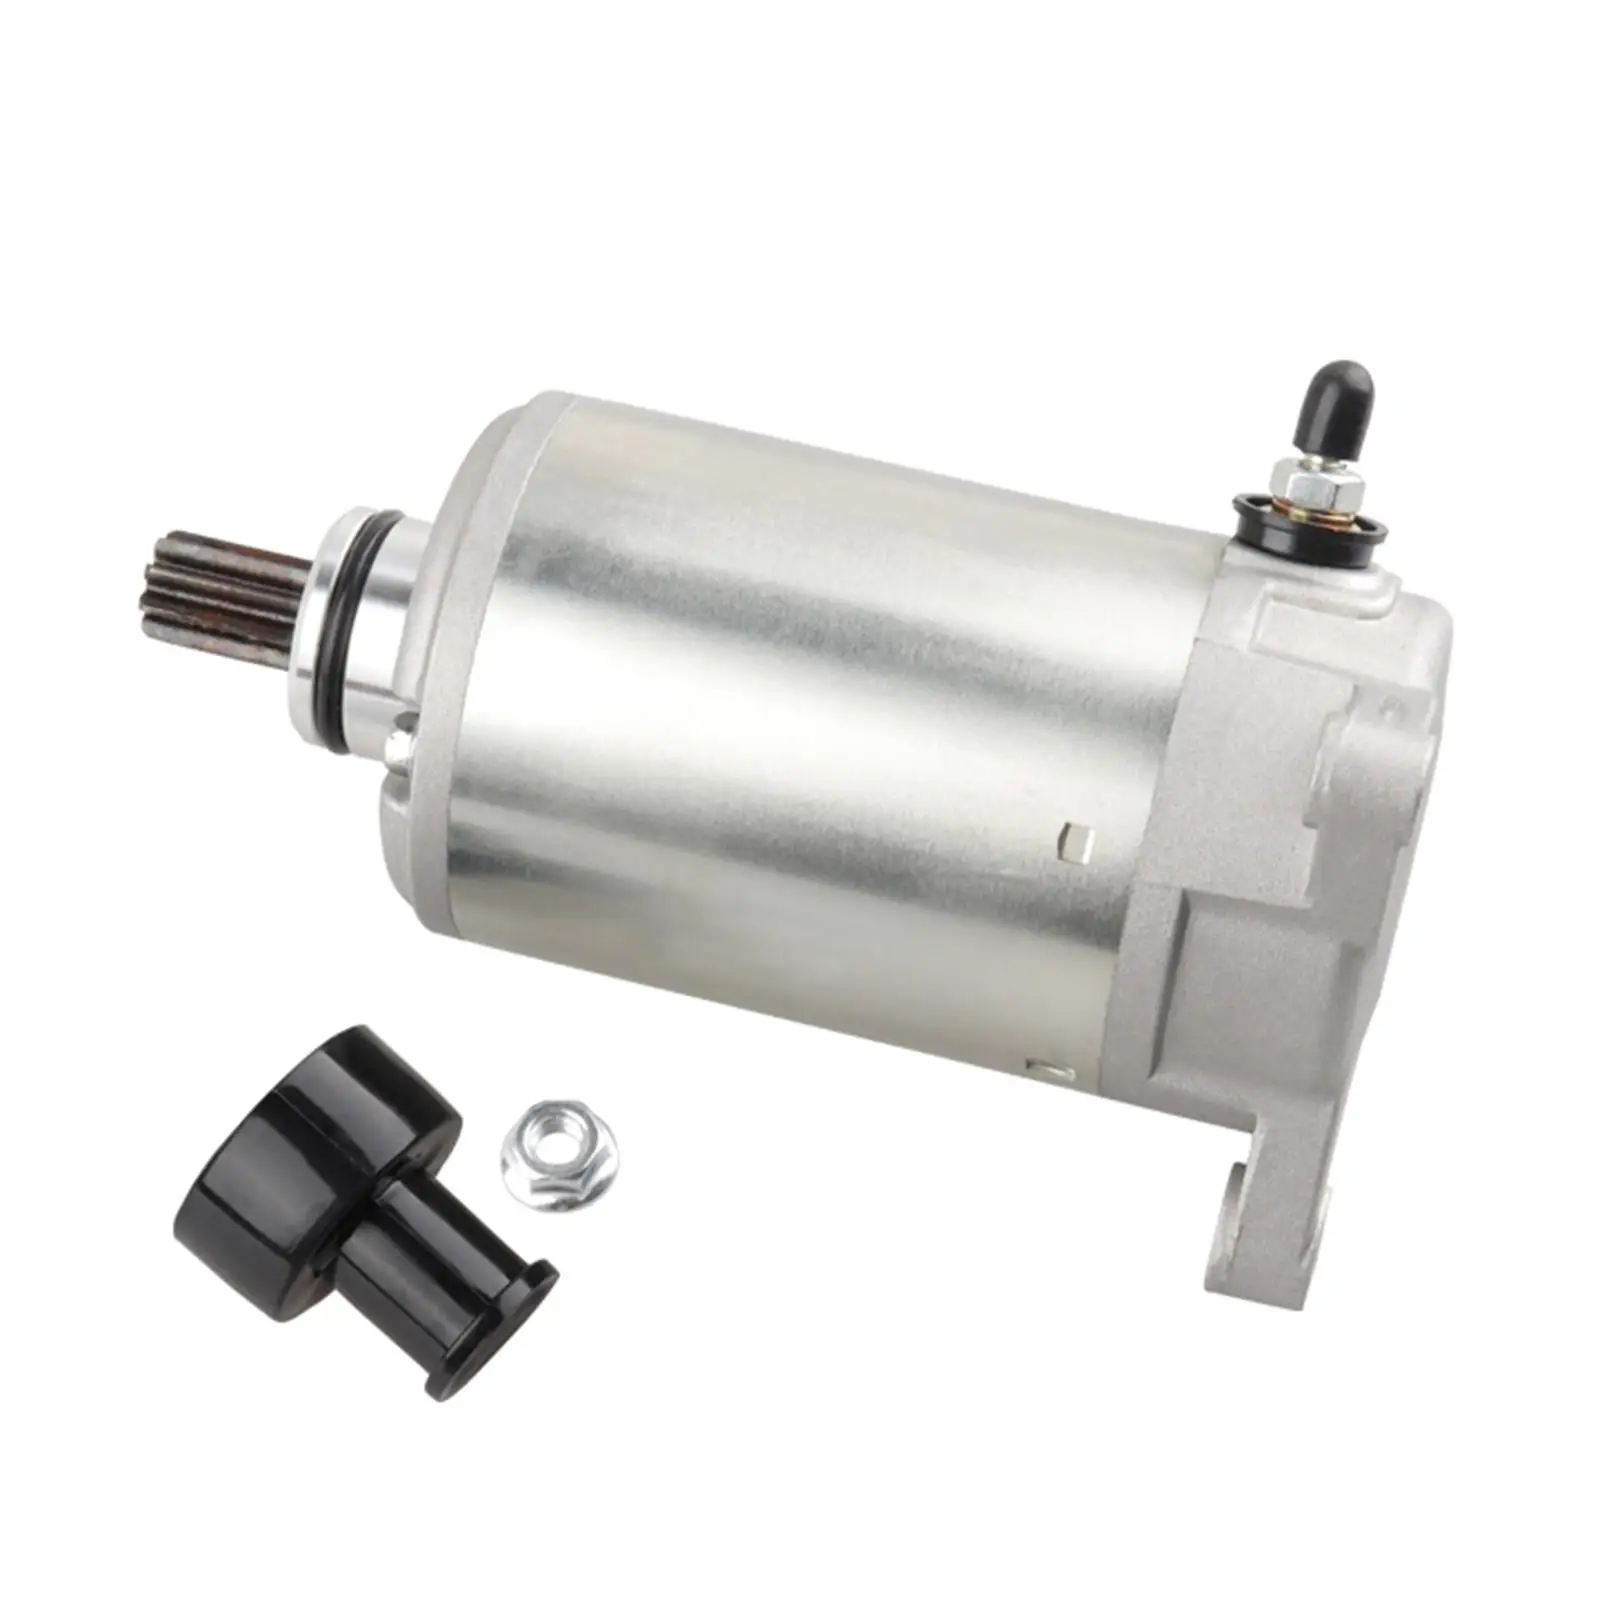 Electrical Engine Starter Motor Assembly Replacement Repair Parts for BMW 650 Engine Parts Easily Install Lightweight